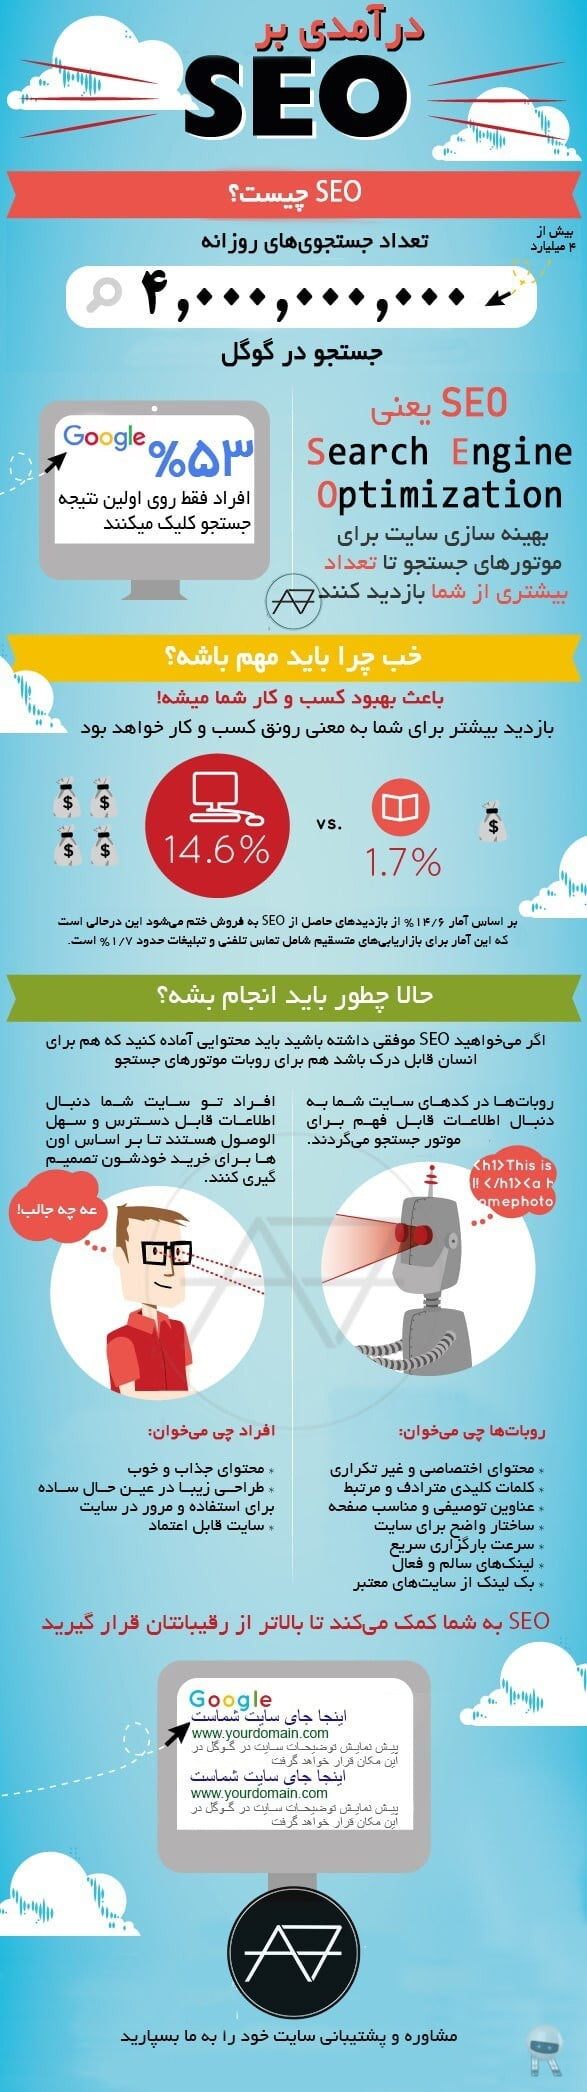 what is seo infographic دوره جامع جوهره سئو